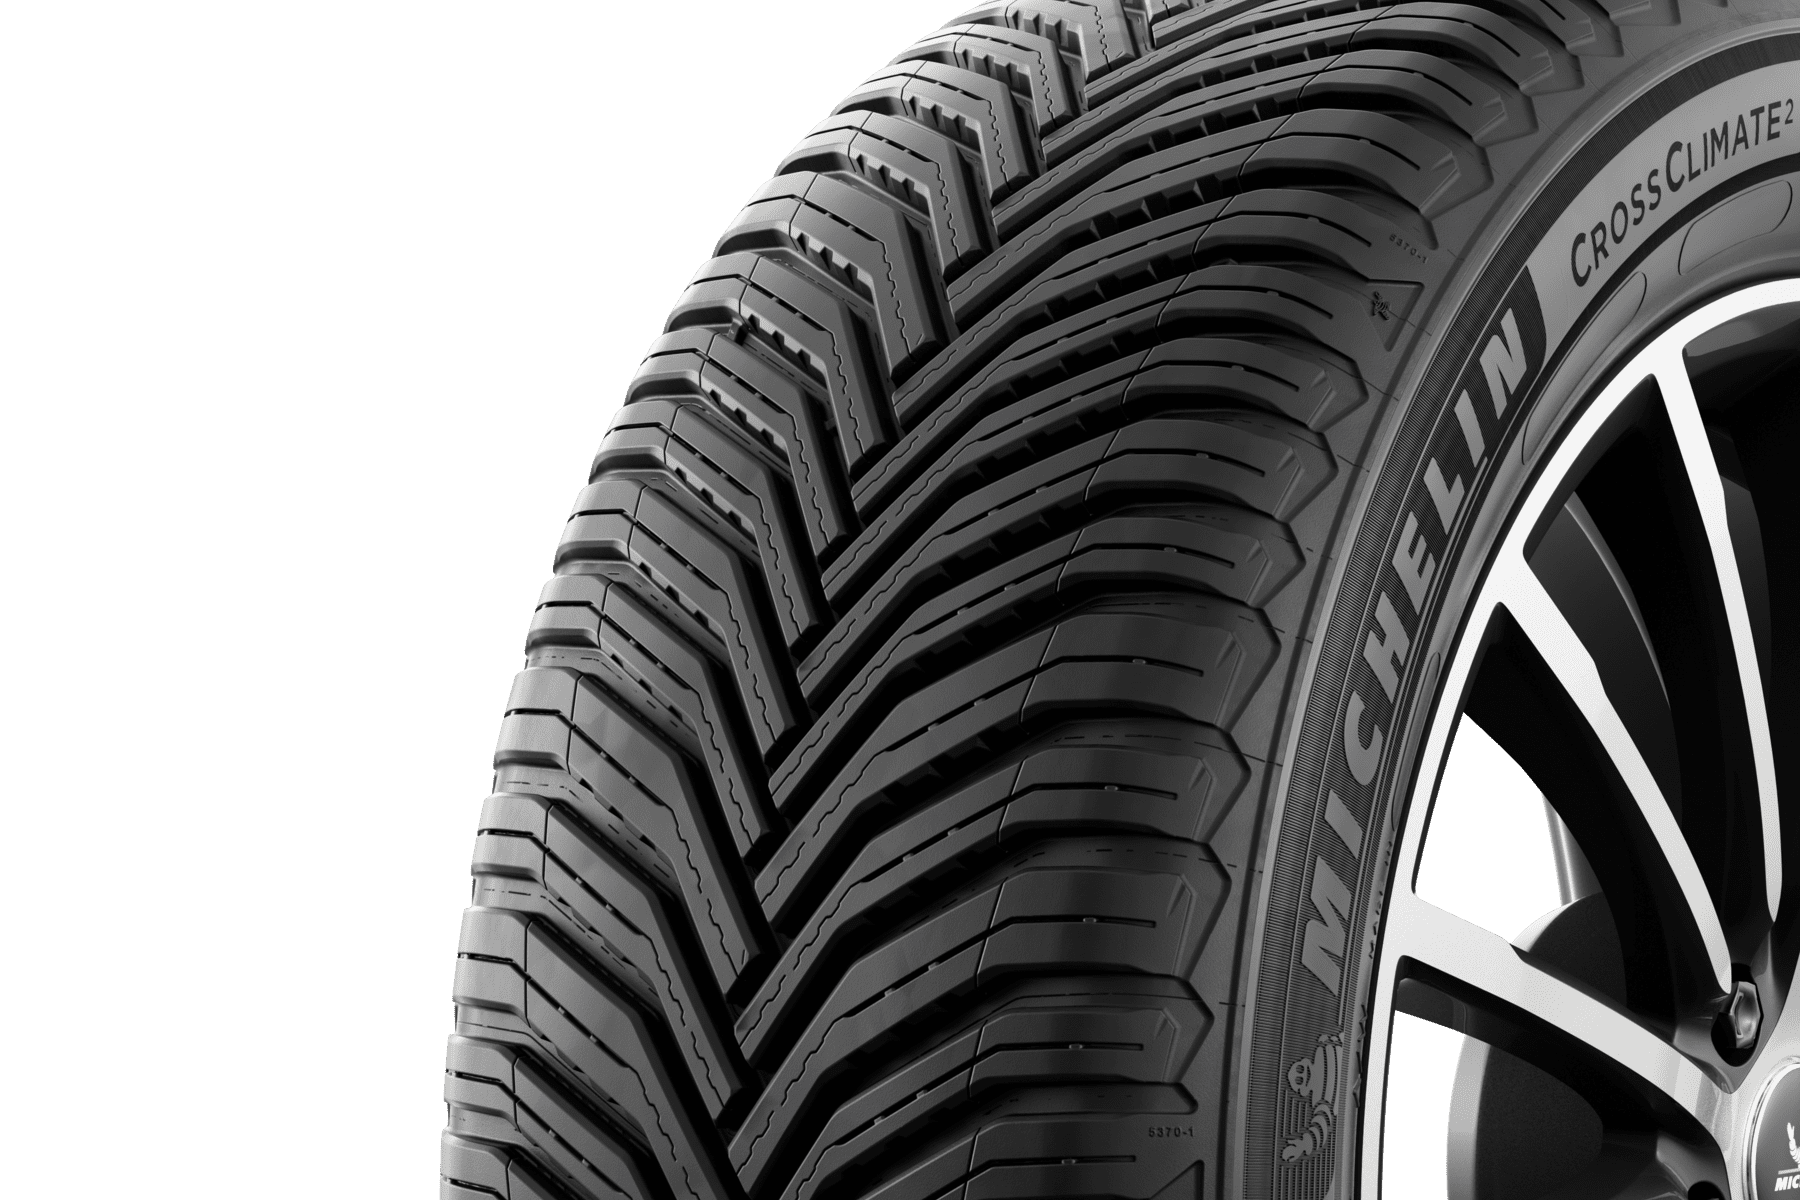 michelin-crossclimate-2-tire-review-tire-space-tires-reviews-all-brands